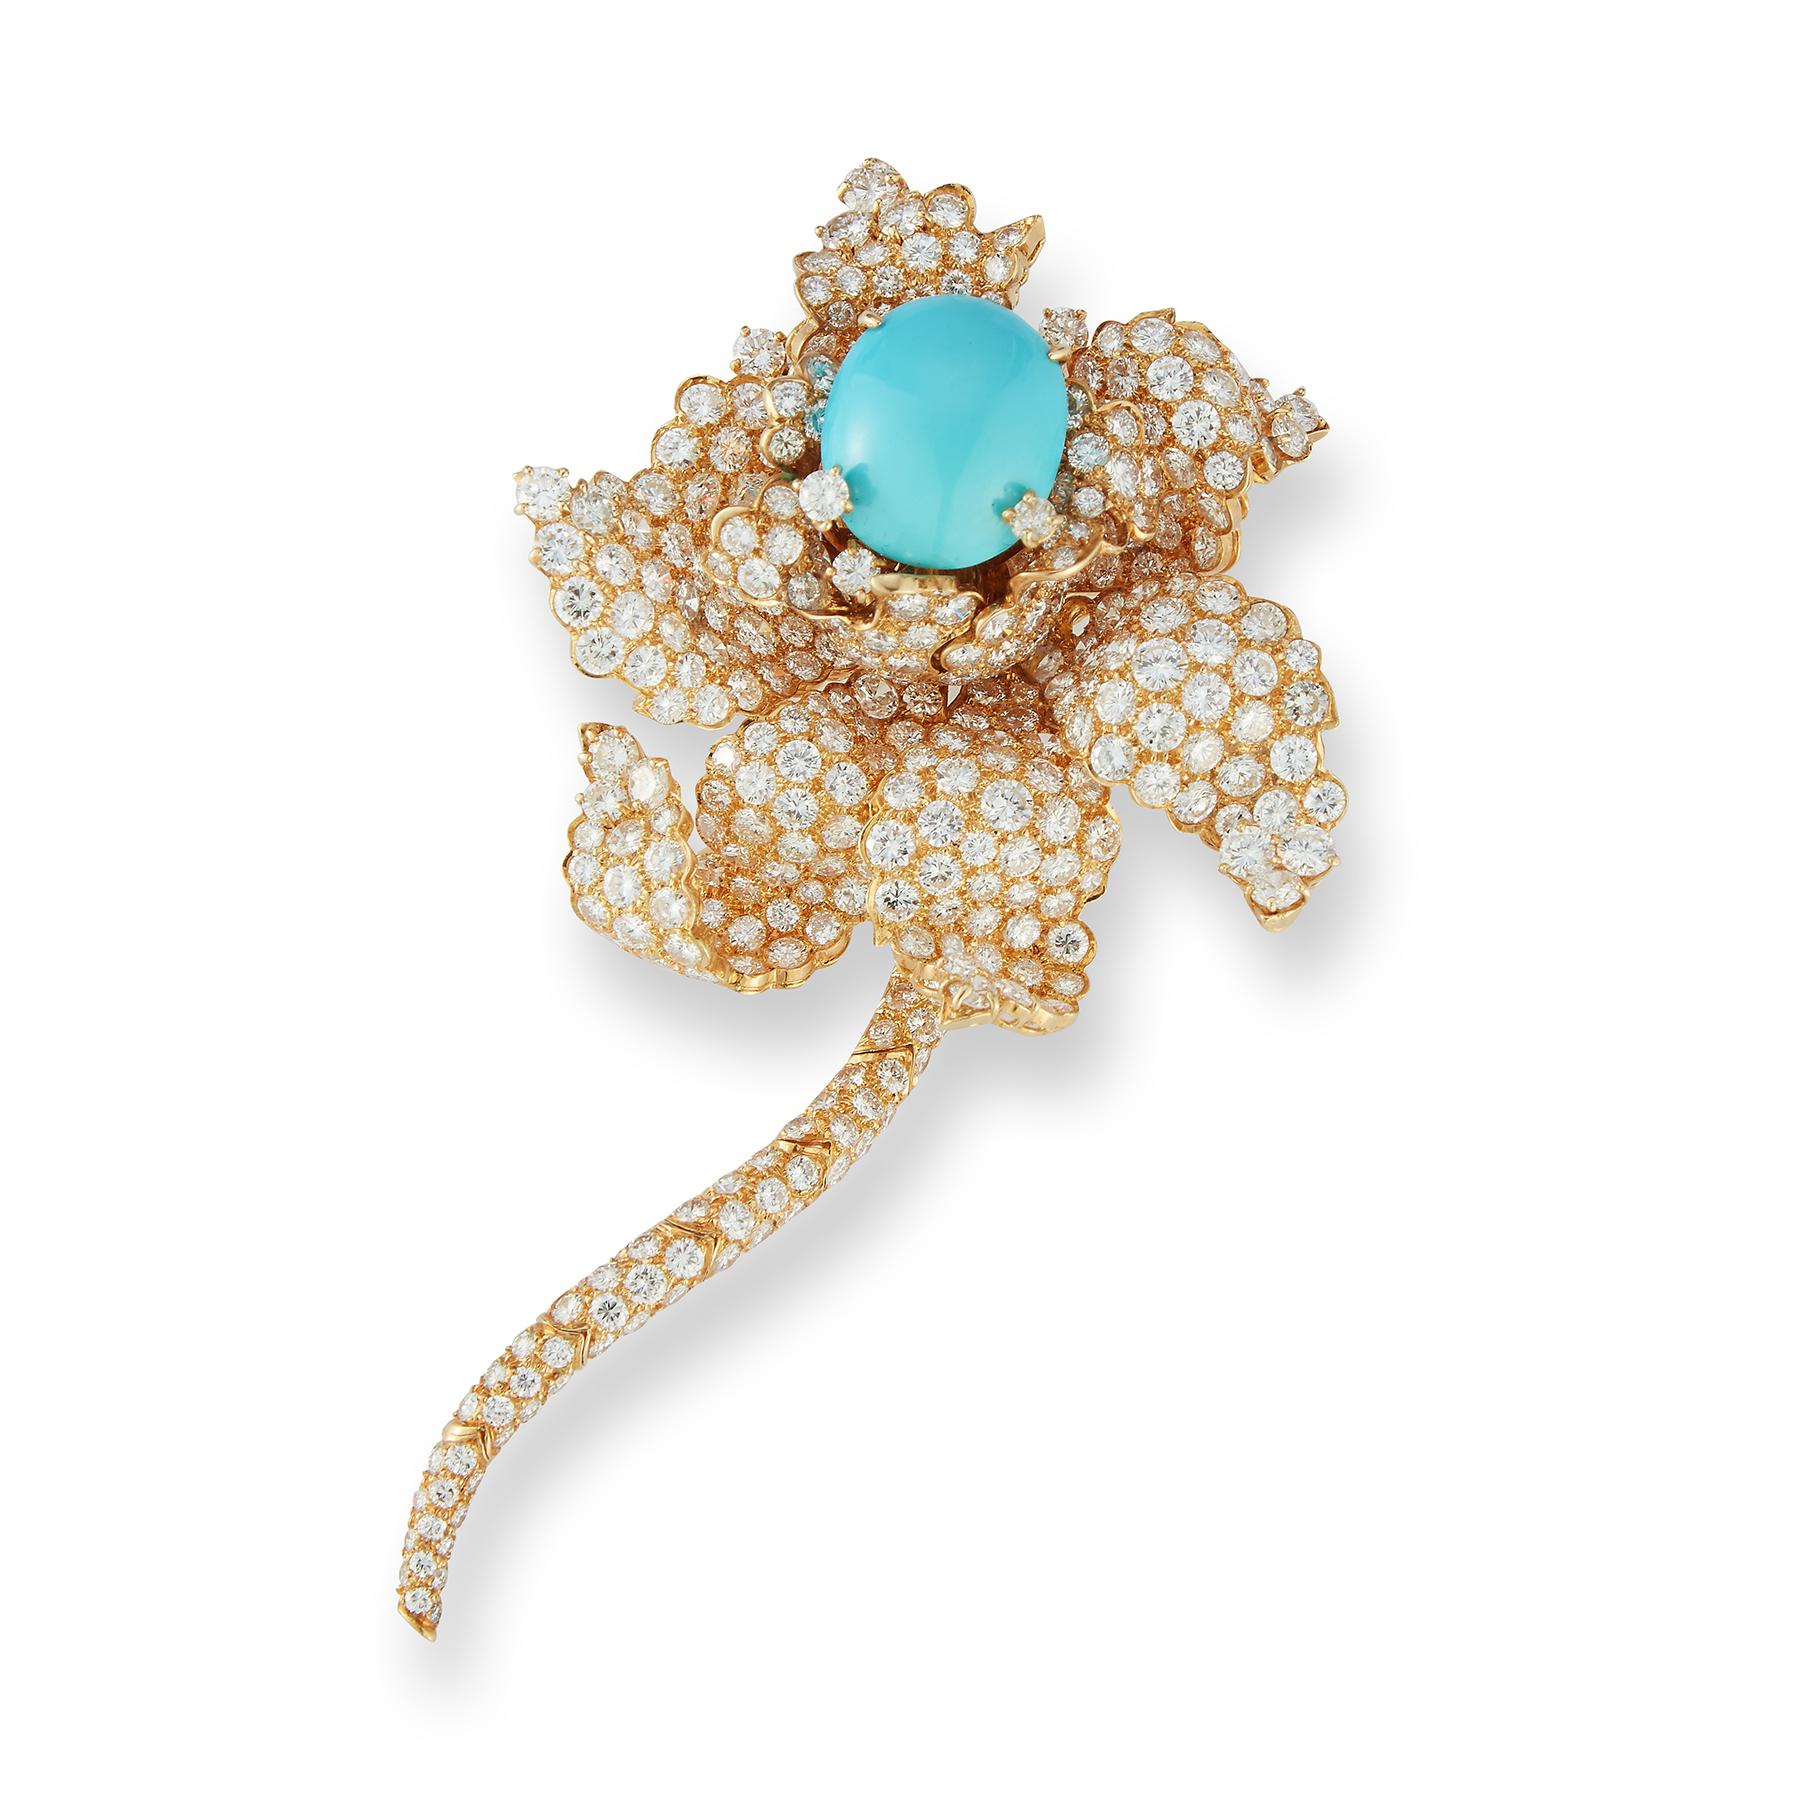 Cabochon Turquoise & Diamond Flower Brooch 
One large center cabochon turquoise surrounded by round cut diamonds approximately 18.00 cts. 
With detachable stem

Measurements: 3.75